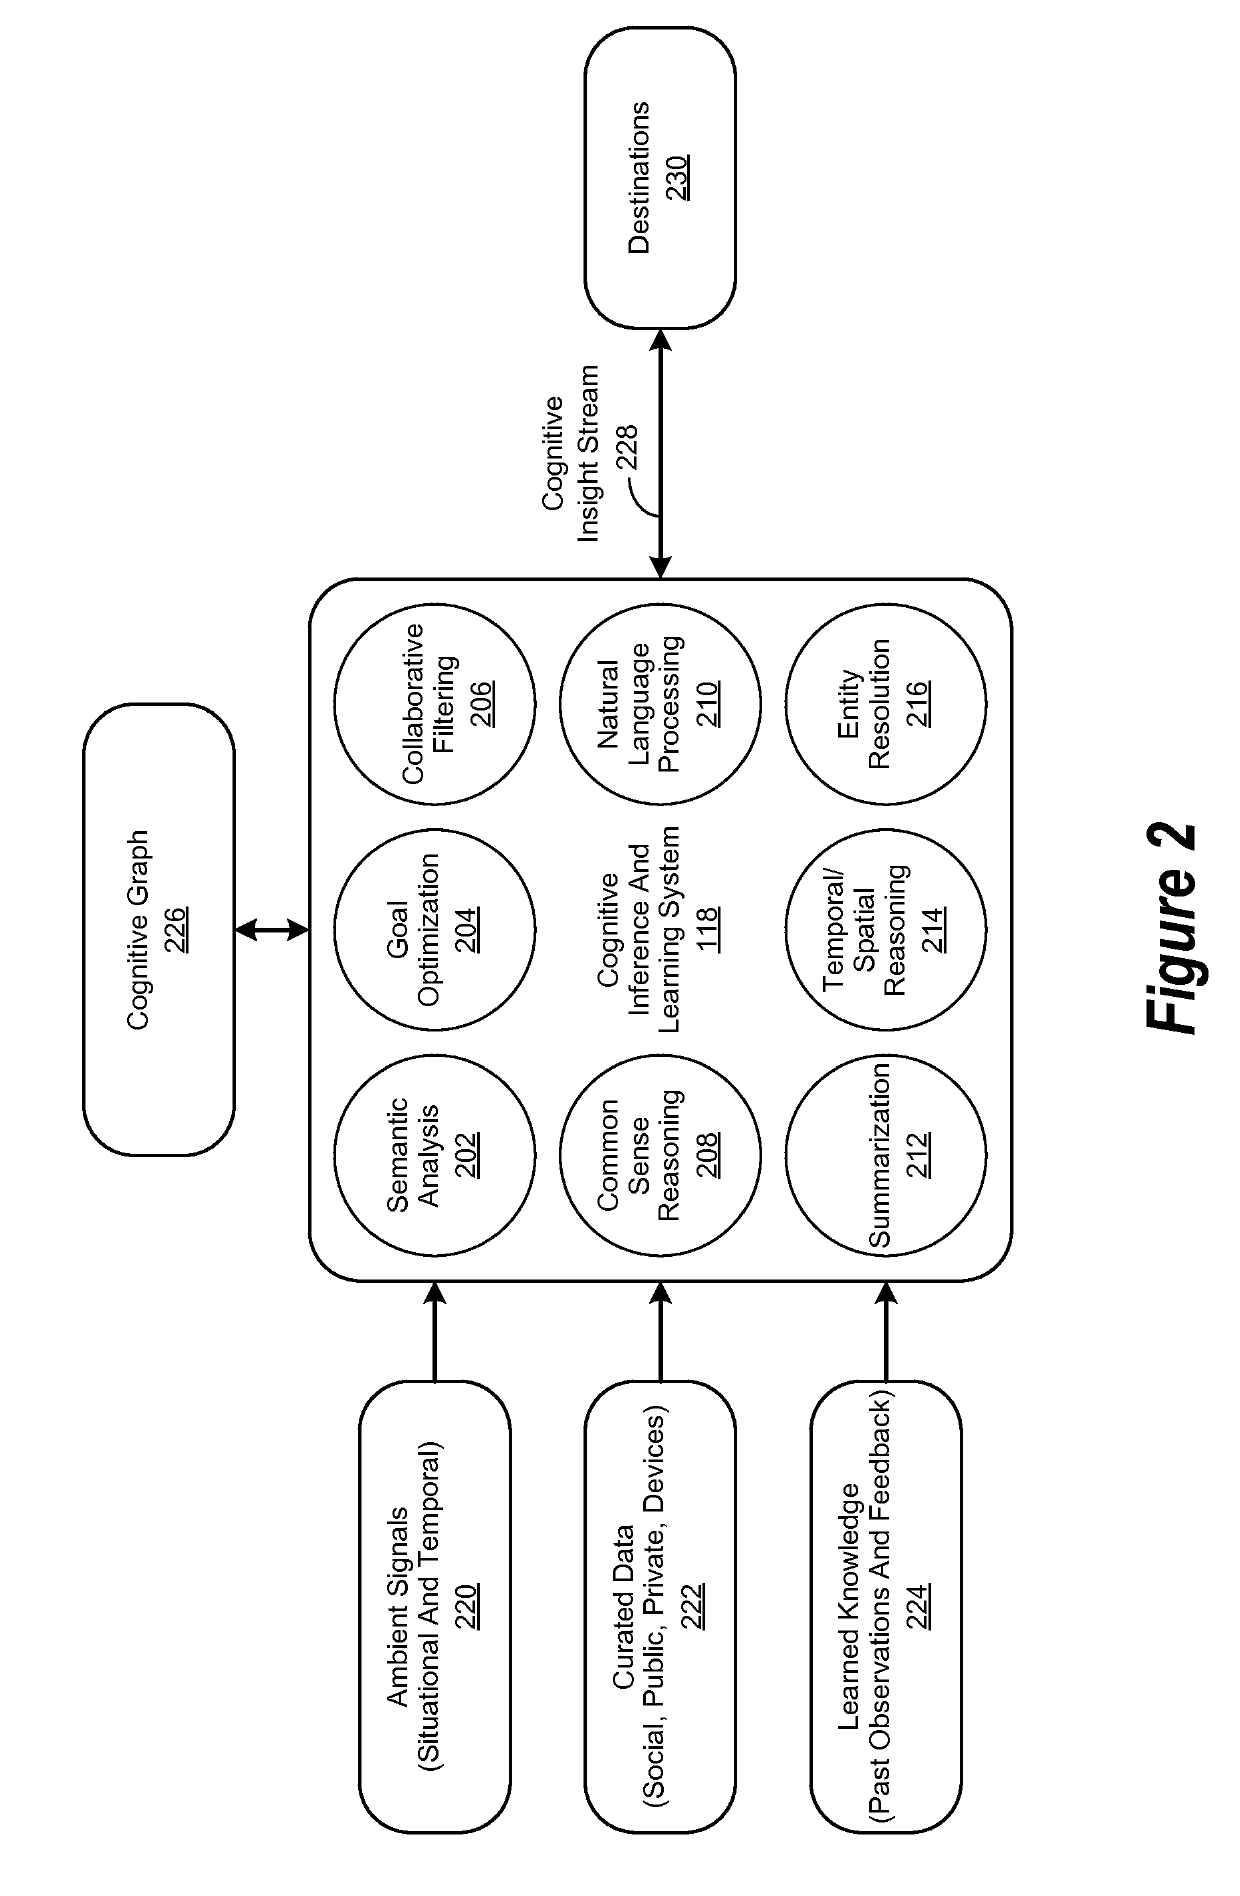 Method for performing a cognitive learning operation via a cognitive learning framework